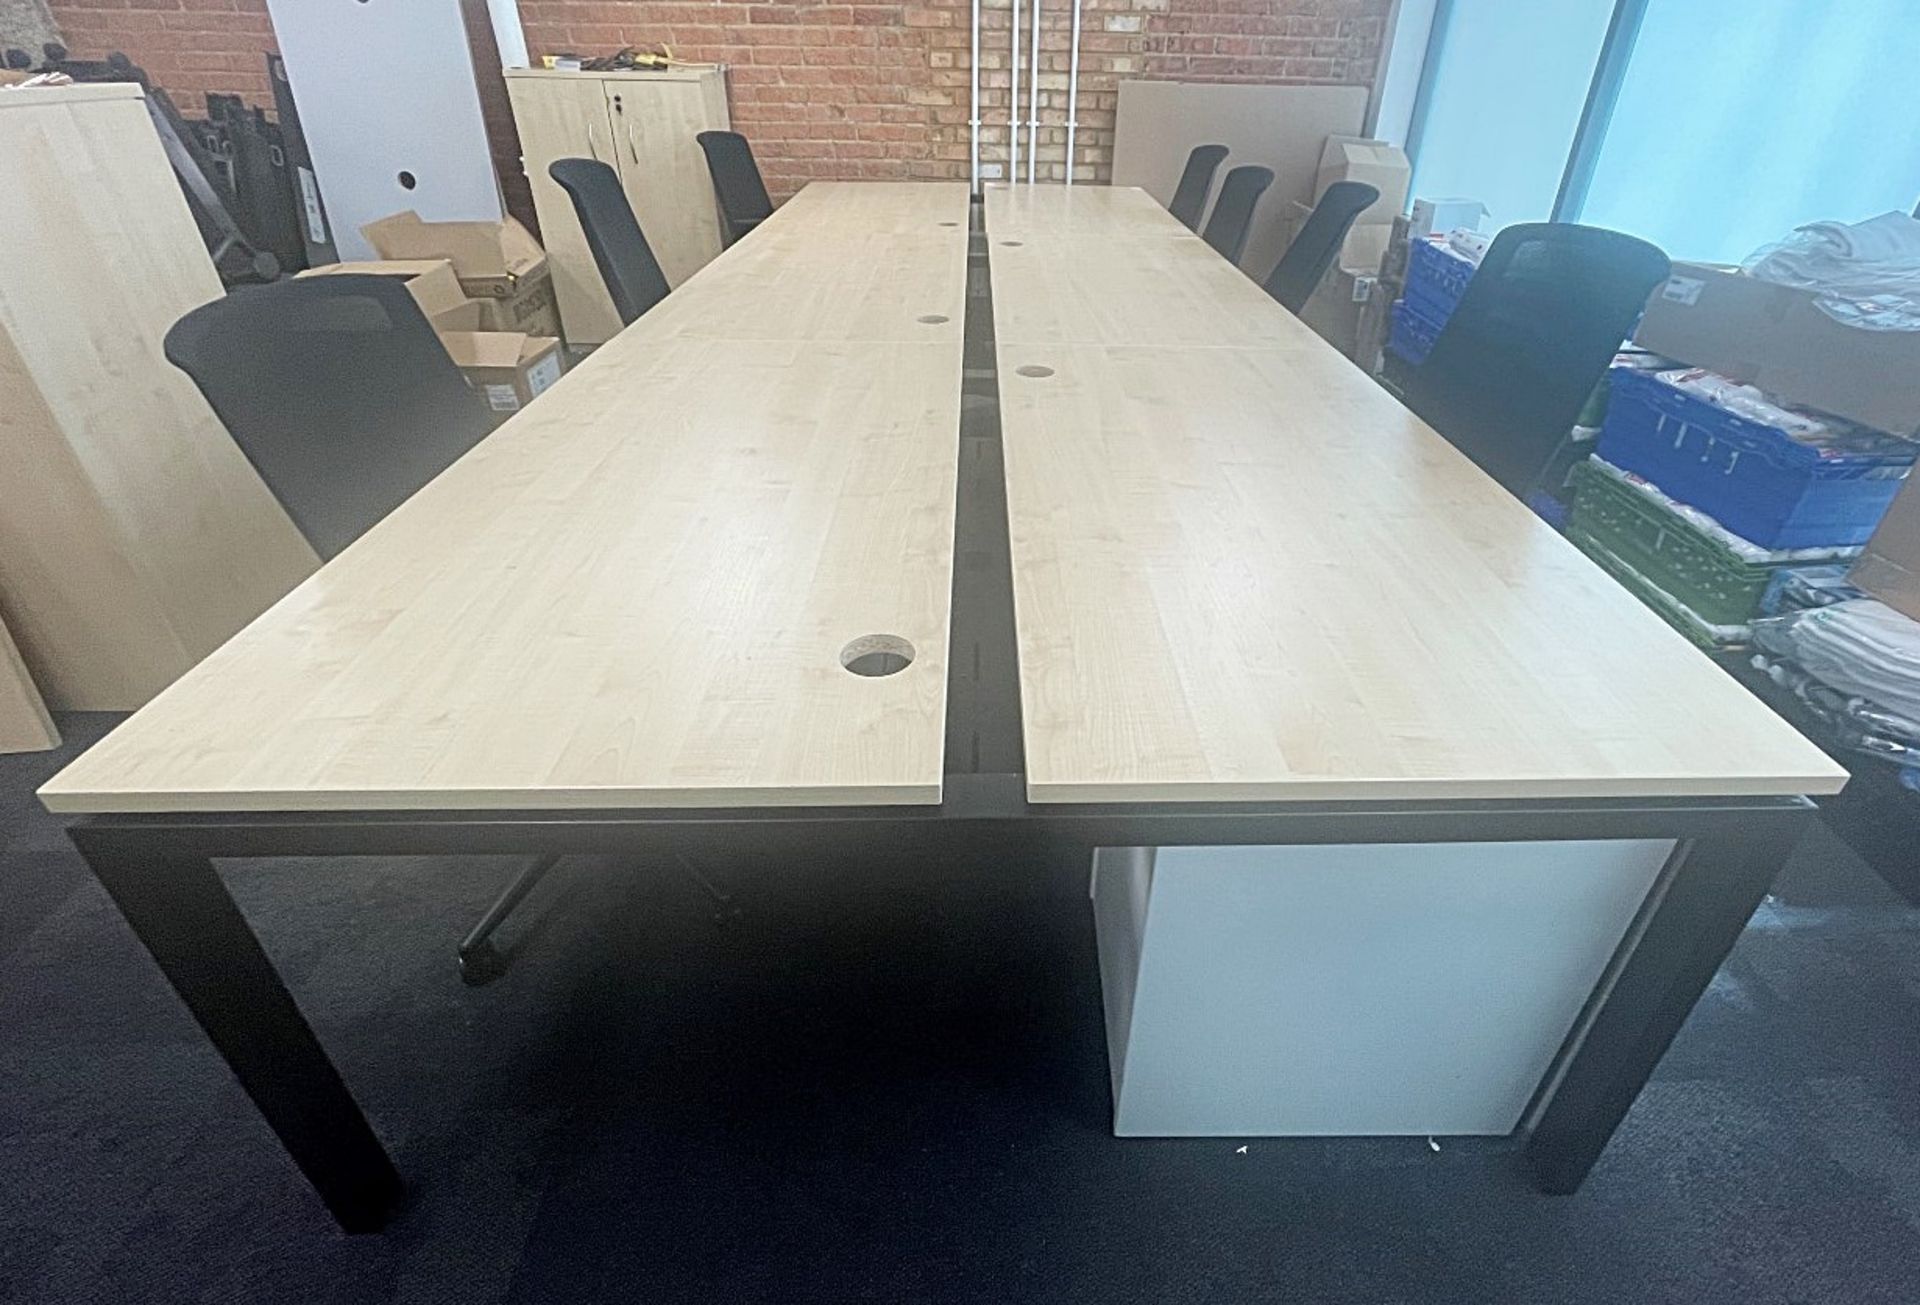 1 x Bank of 6 Modular Desks Plus 7 x Screen Dividers - To Be Removed From An Executive Office - Image 10 of 14